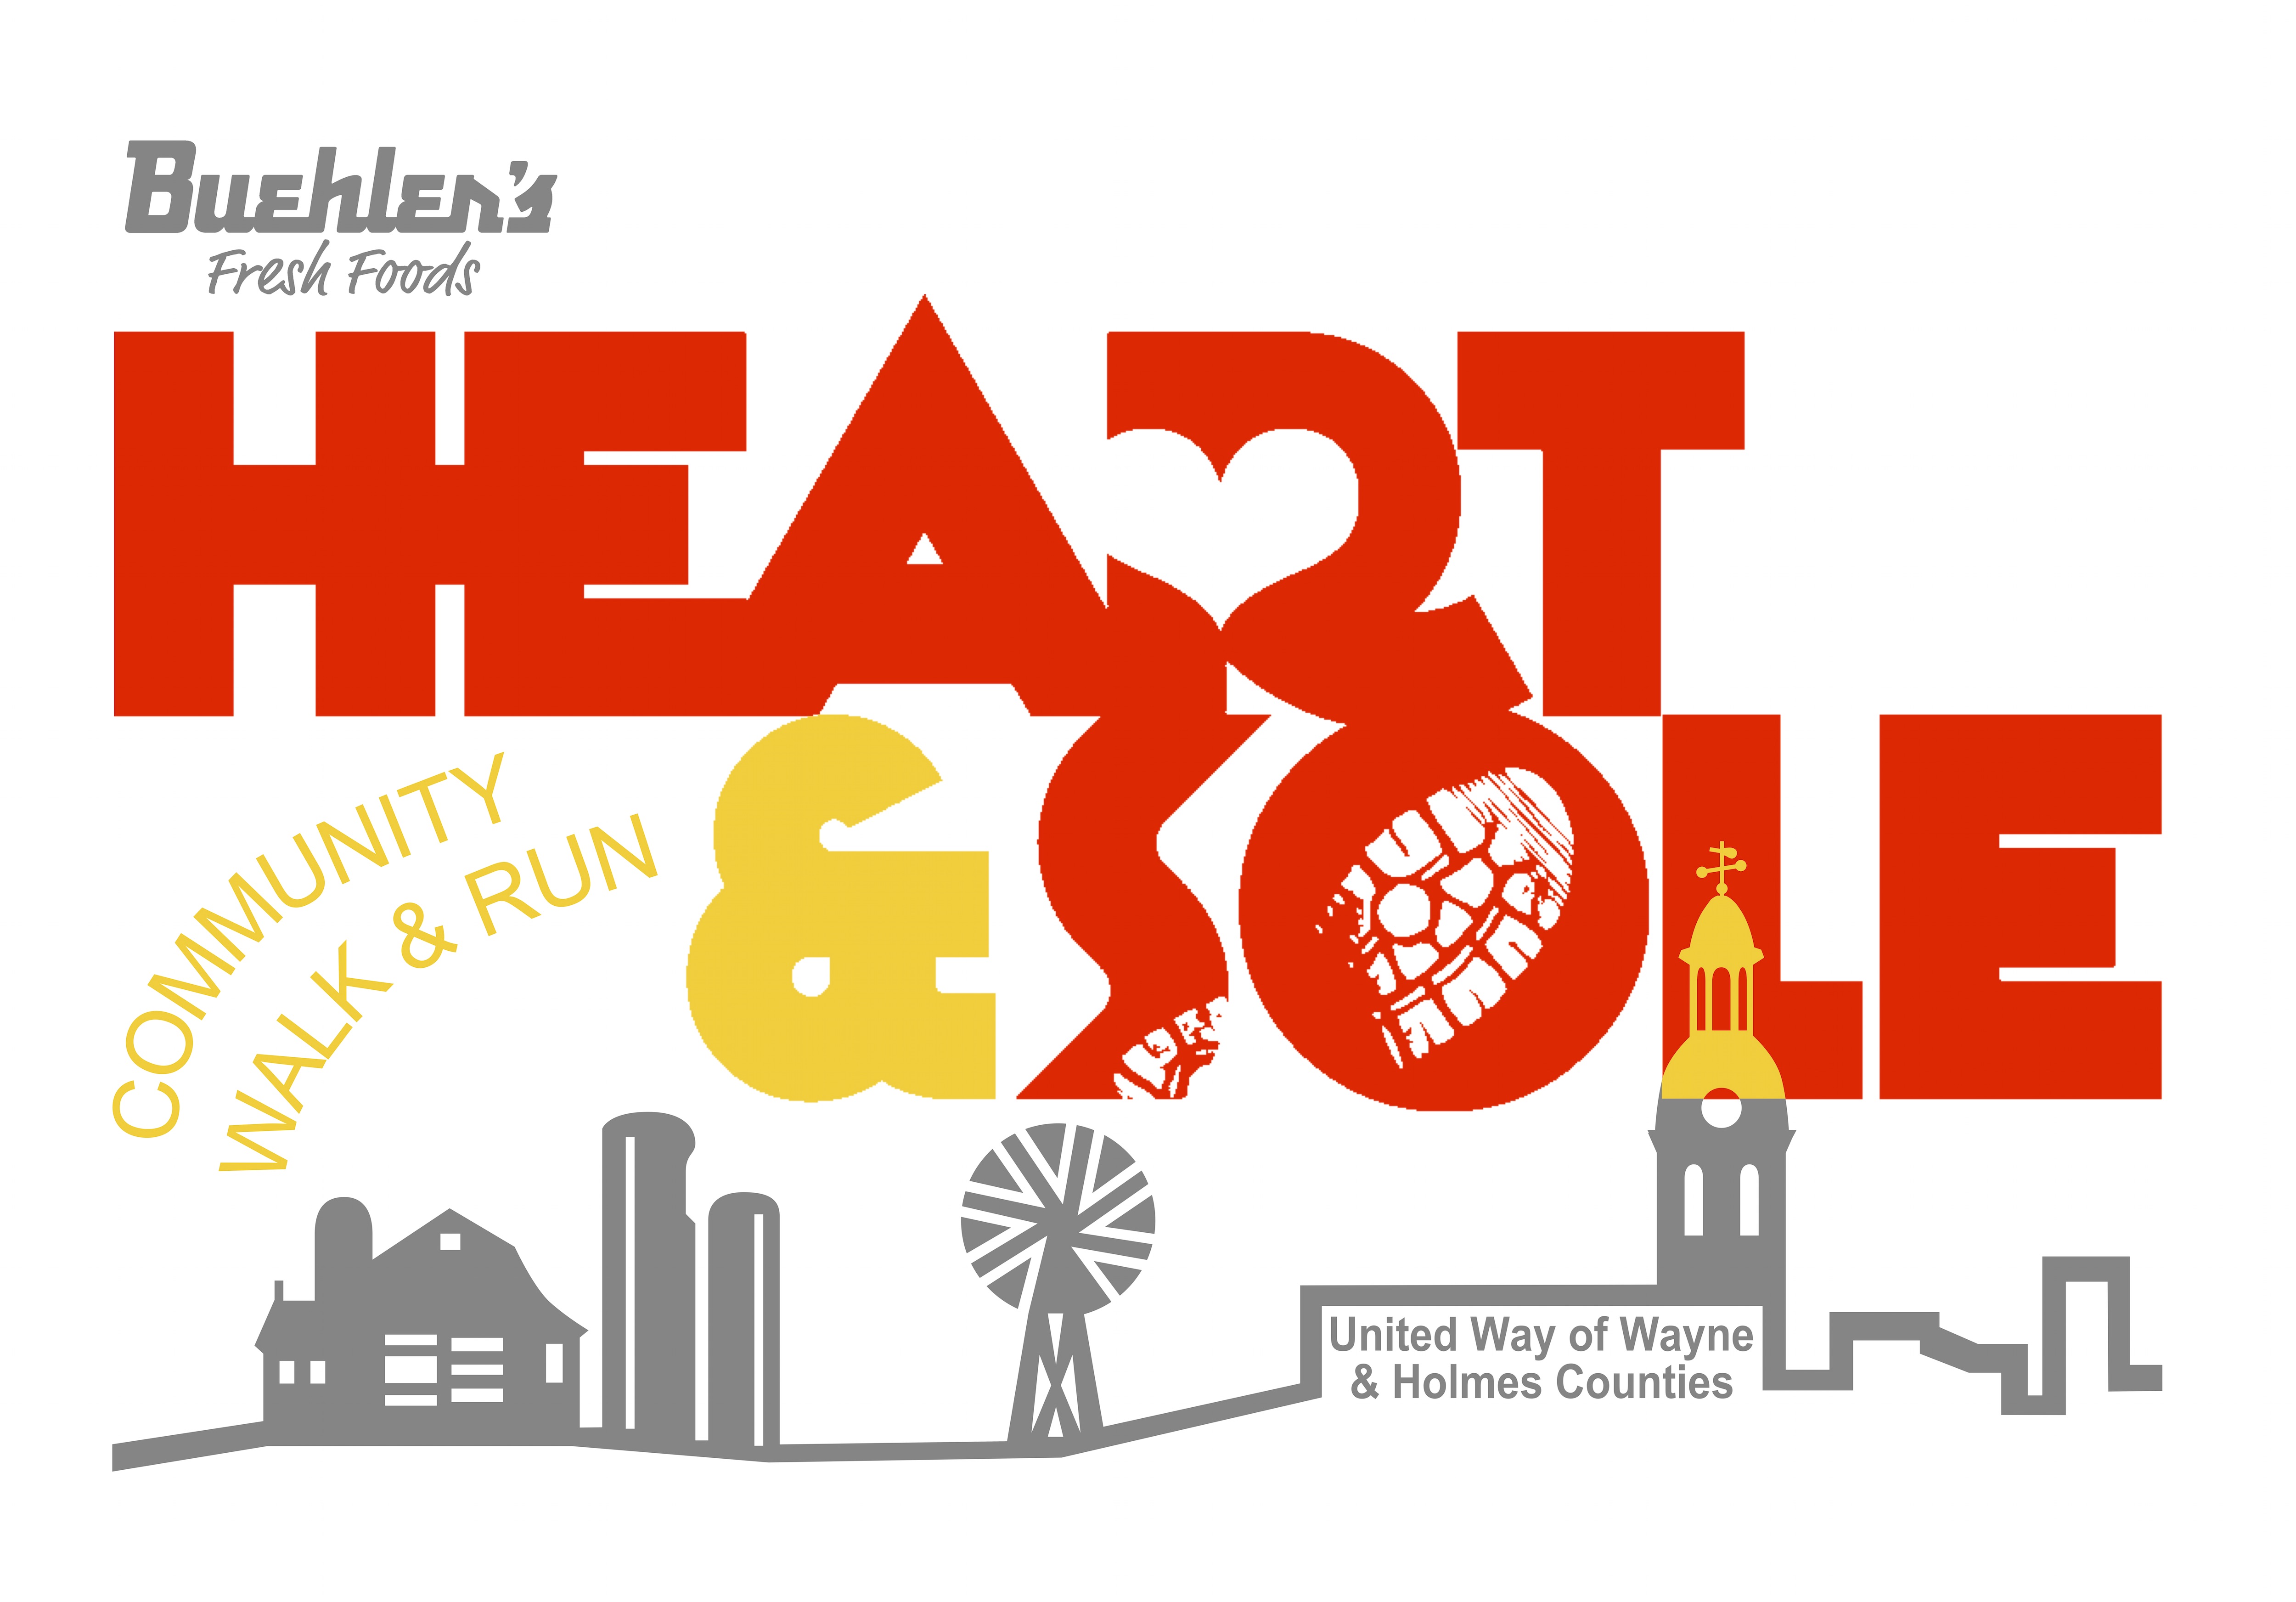 Buehler's Heart and Sole Community Walk and Run